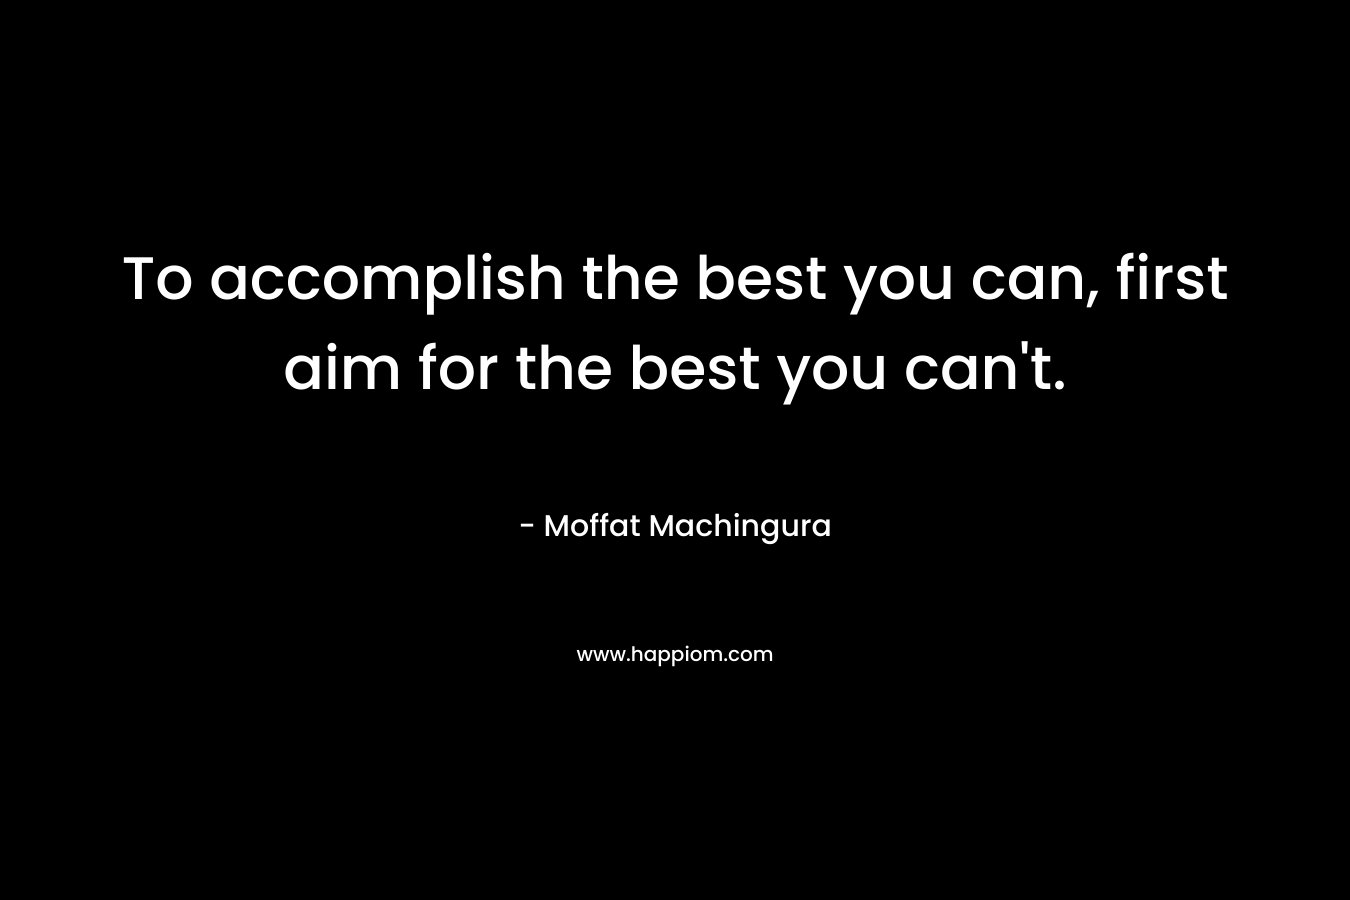 To accomplish the best you can, first aim for the best you can't.